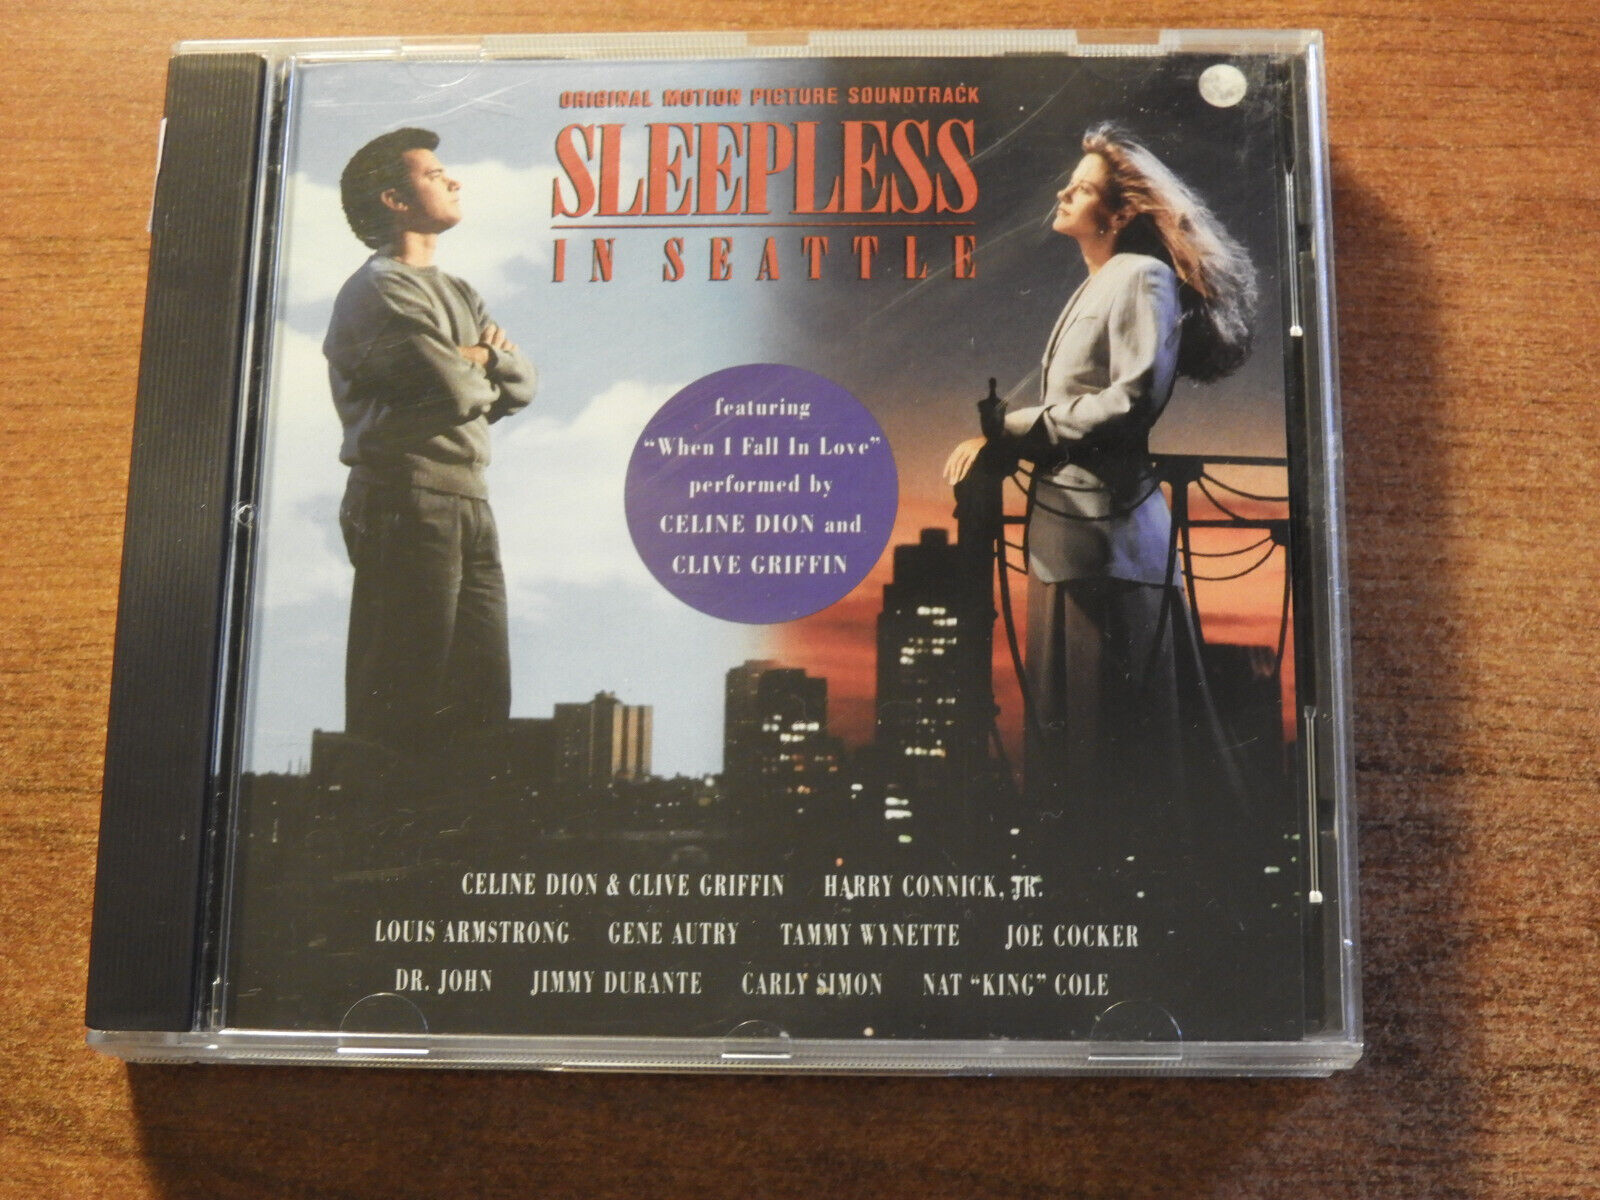 Sleepless in Seattle (Original Soundtrack) CD - CHOOSE WITH OR WITHOUT A CASE